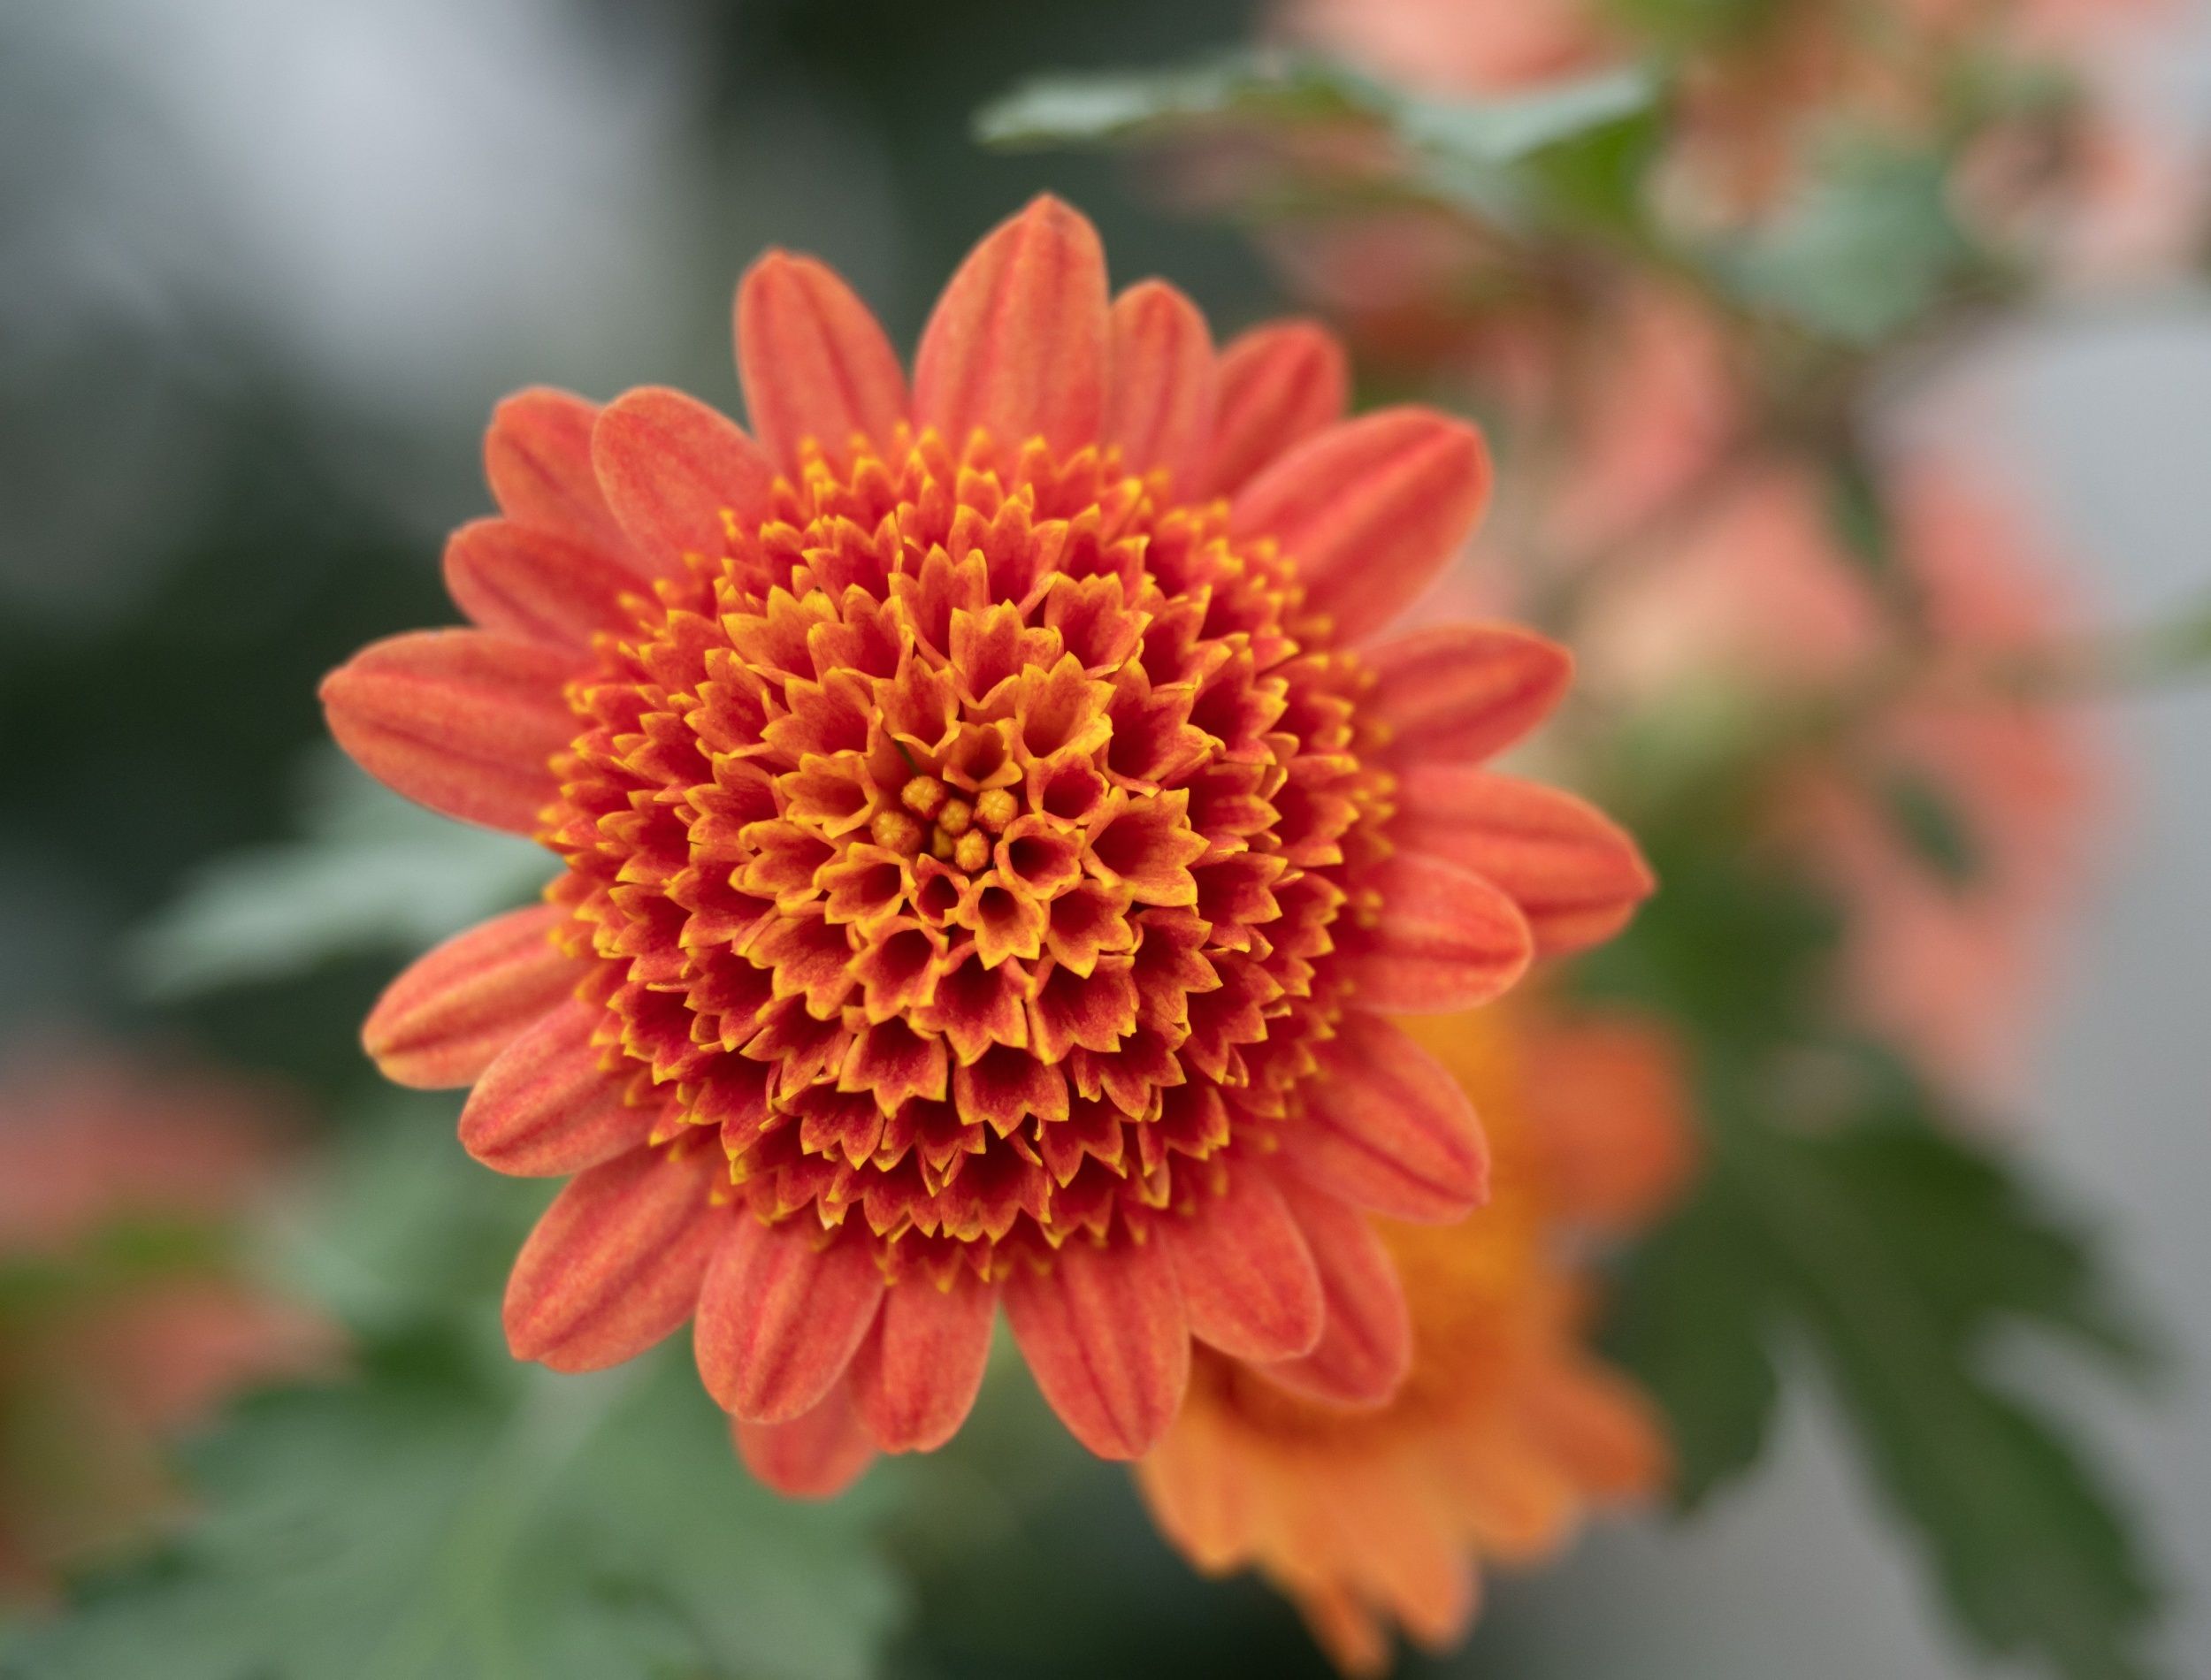 Close up of a salmon-colored chrysanthemum with short ray flowers or petals and multiple disc flowers. Photographed with a shallow depth of field.